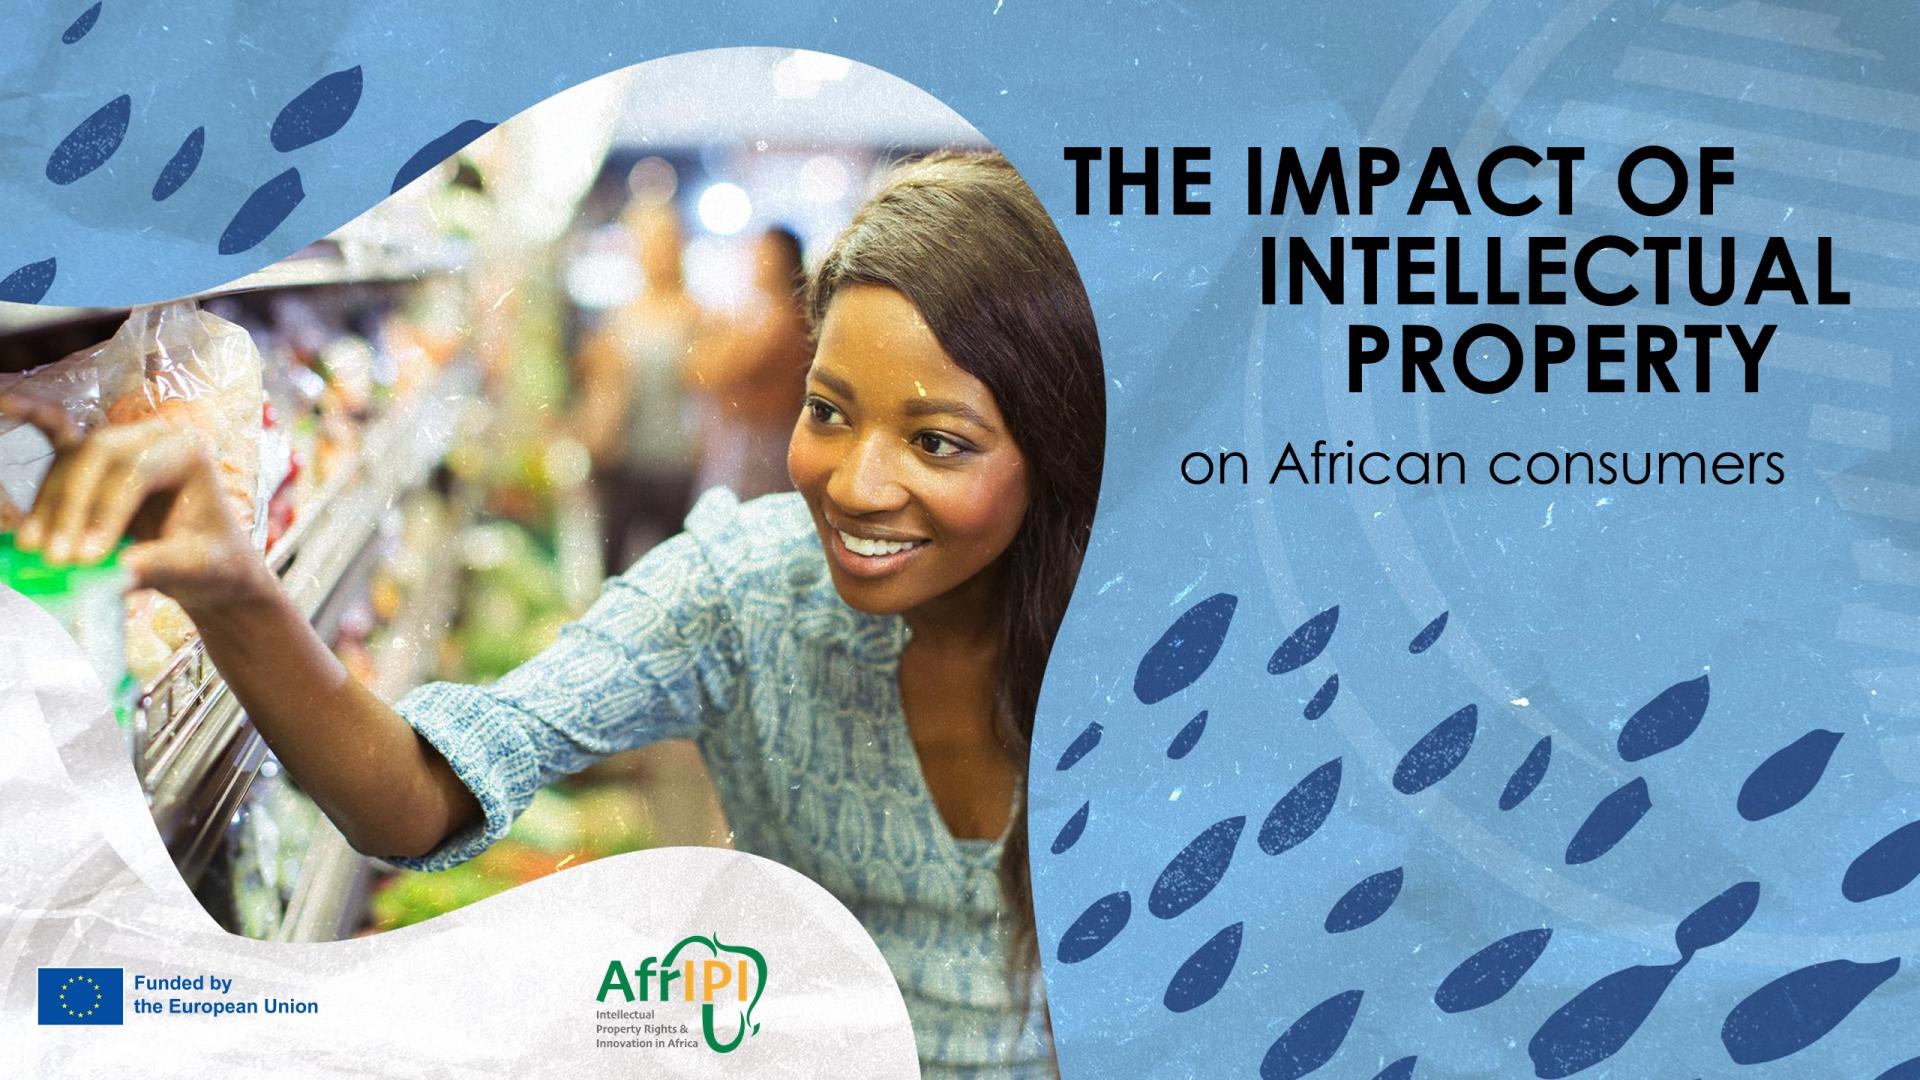 THE IMPACT OF INTELLECTUAL PROPERTY RIGHTS ON AFRICAN CONSUMERS